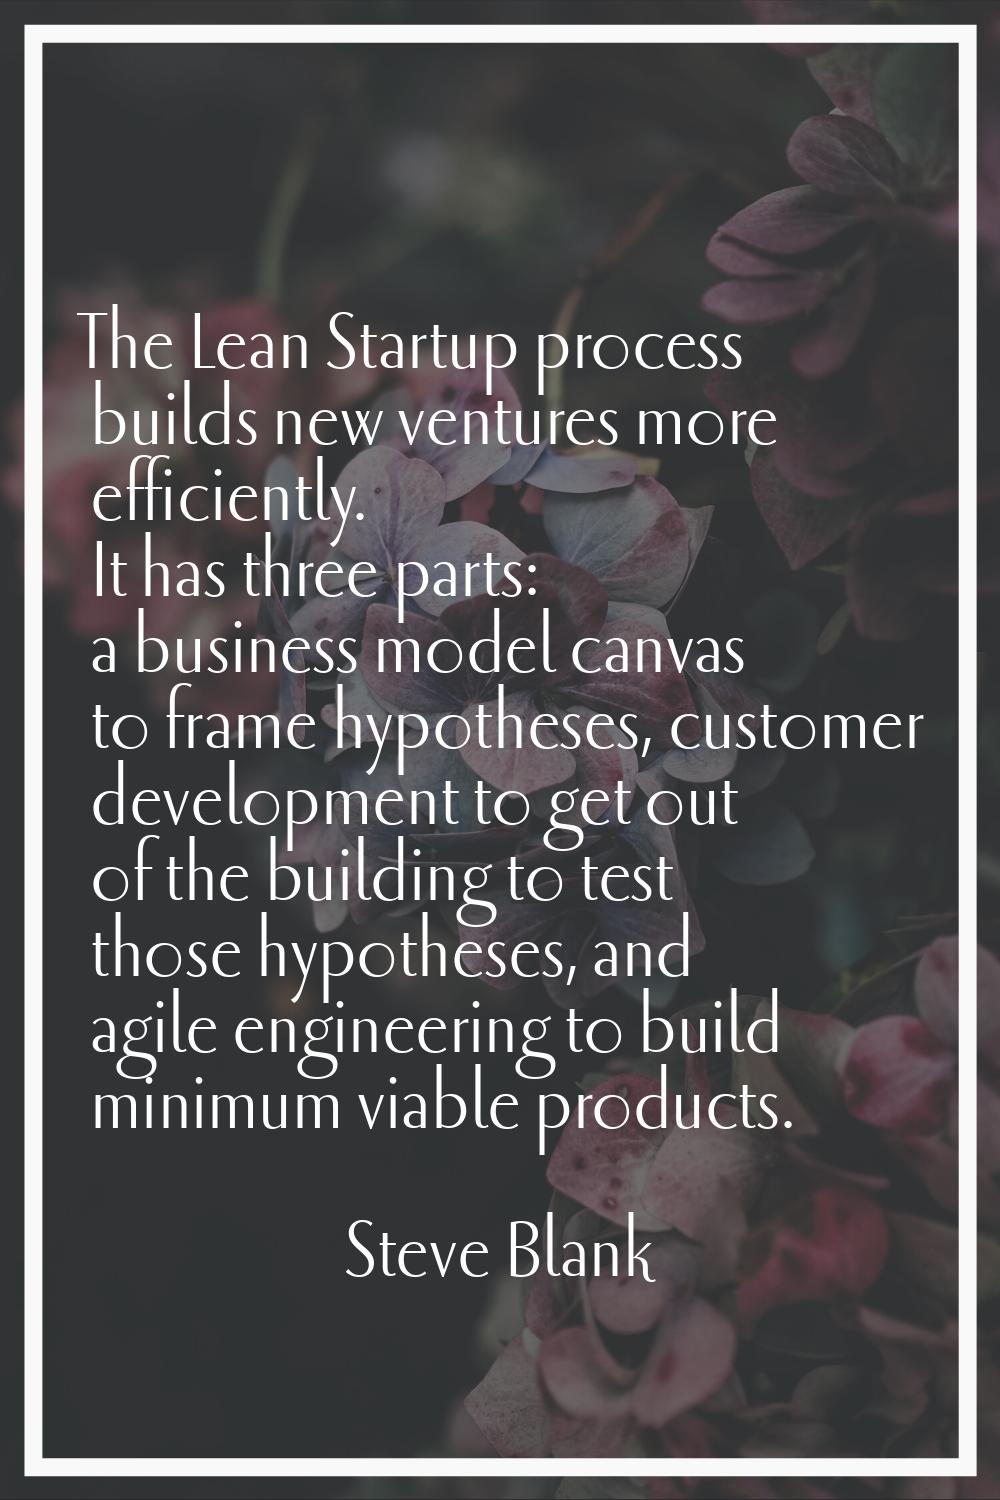 The Lean Startup process builds new ventures more efficiently. It has three parts: a business model